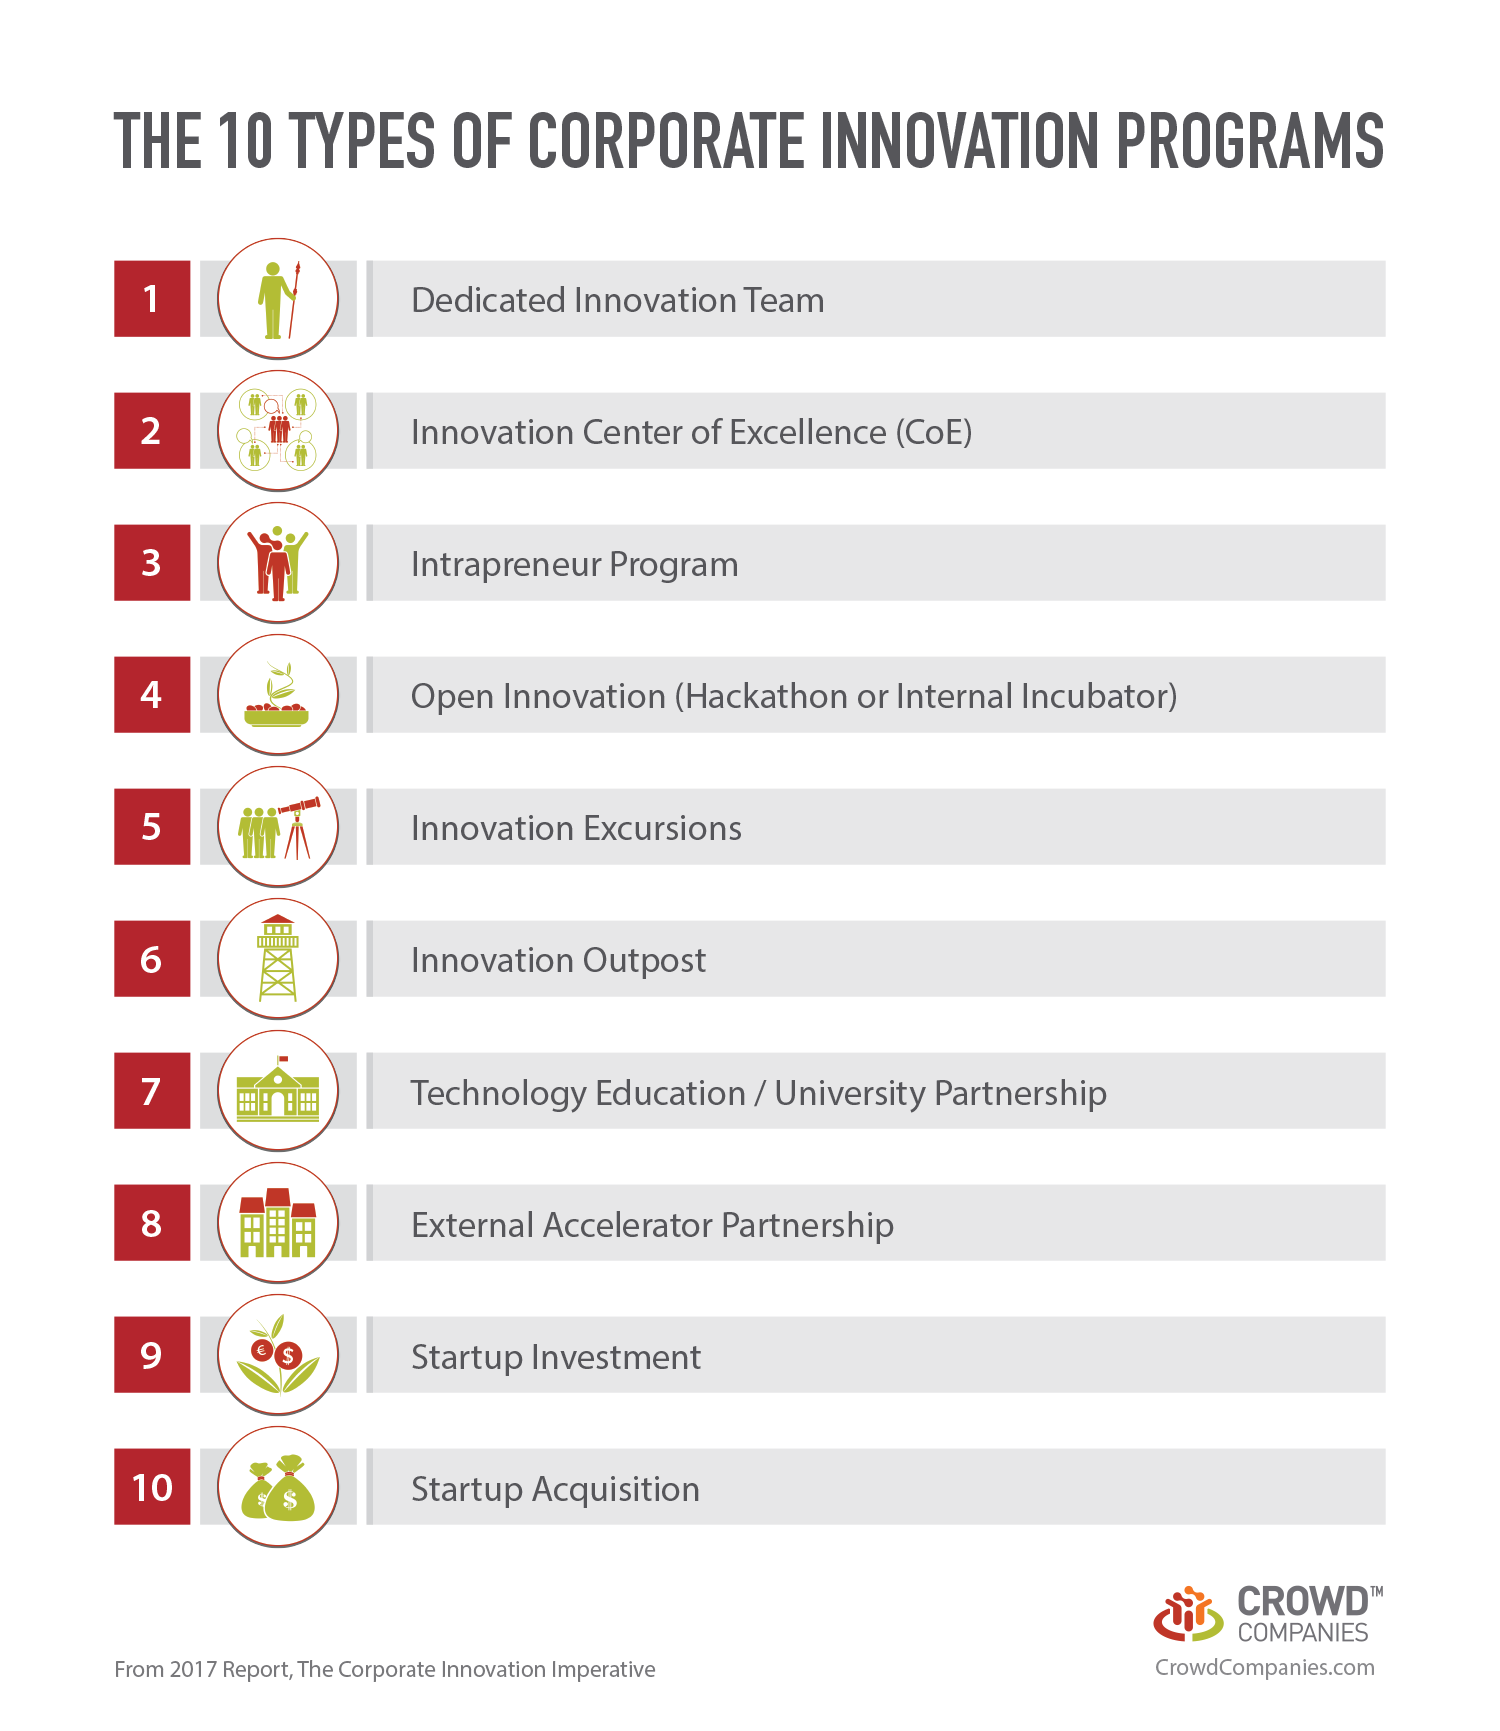 THE 10 TYPES OF CORPORATE INNOVATION PROGRAMS